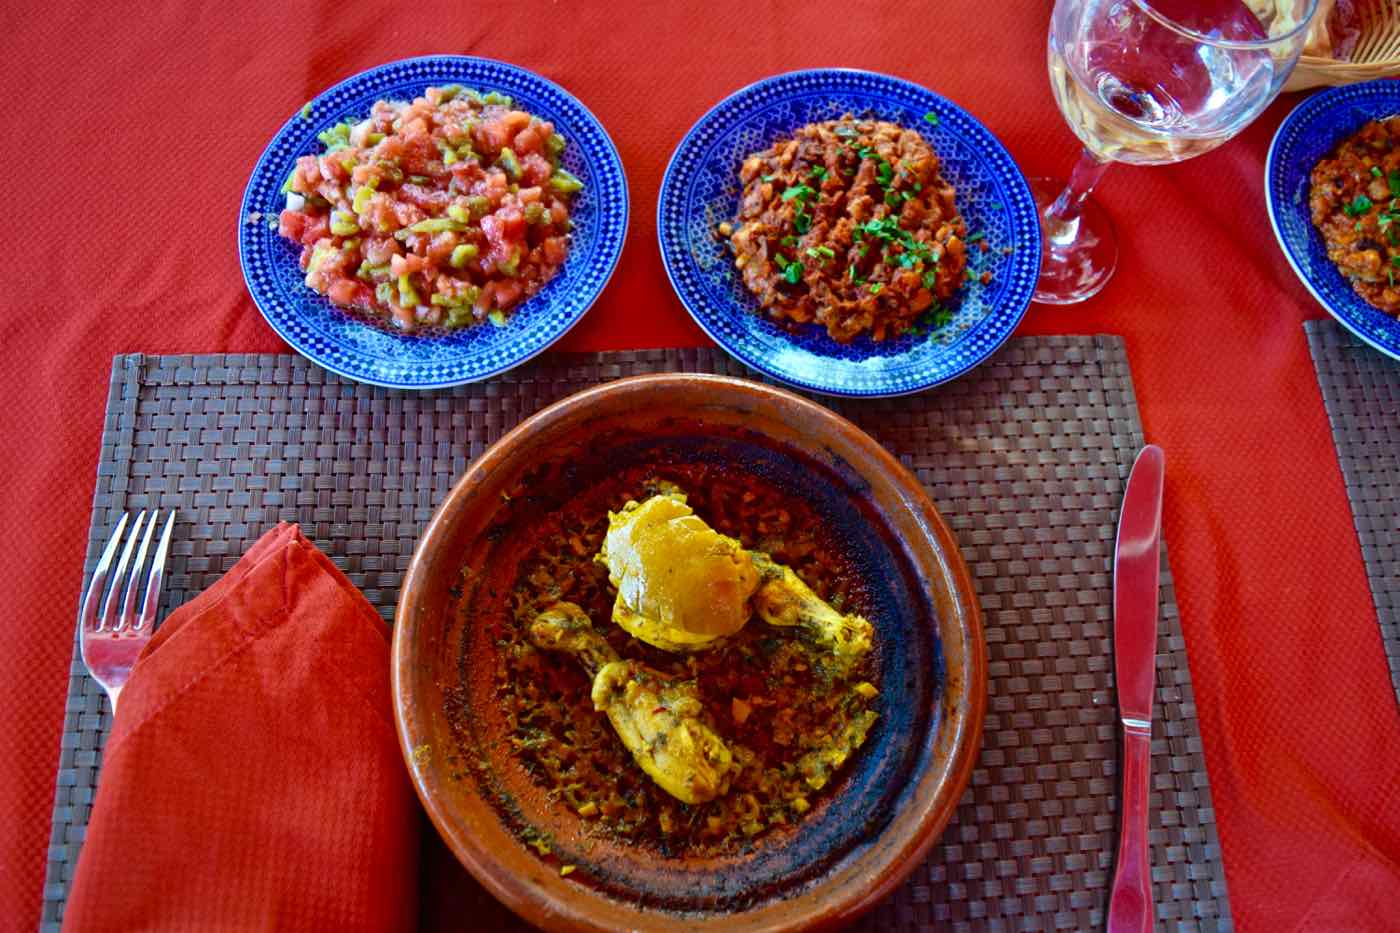 Lunch is served at La Maison Arabe Marrakech